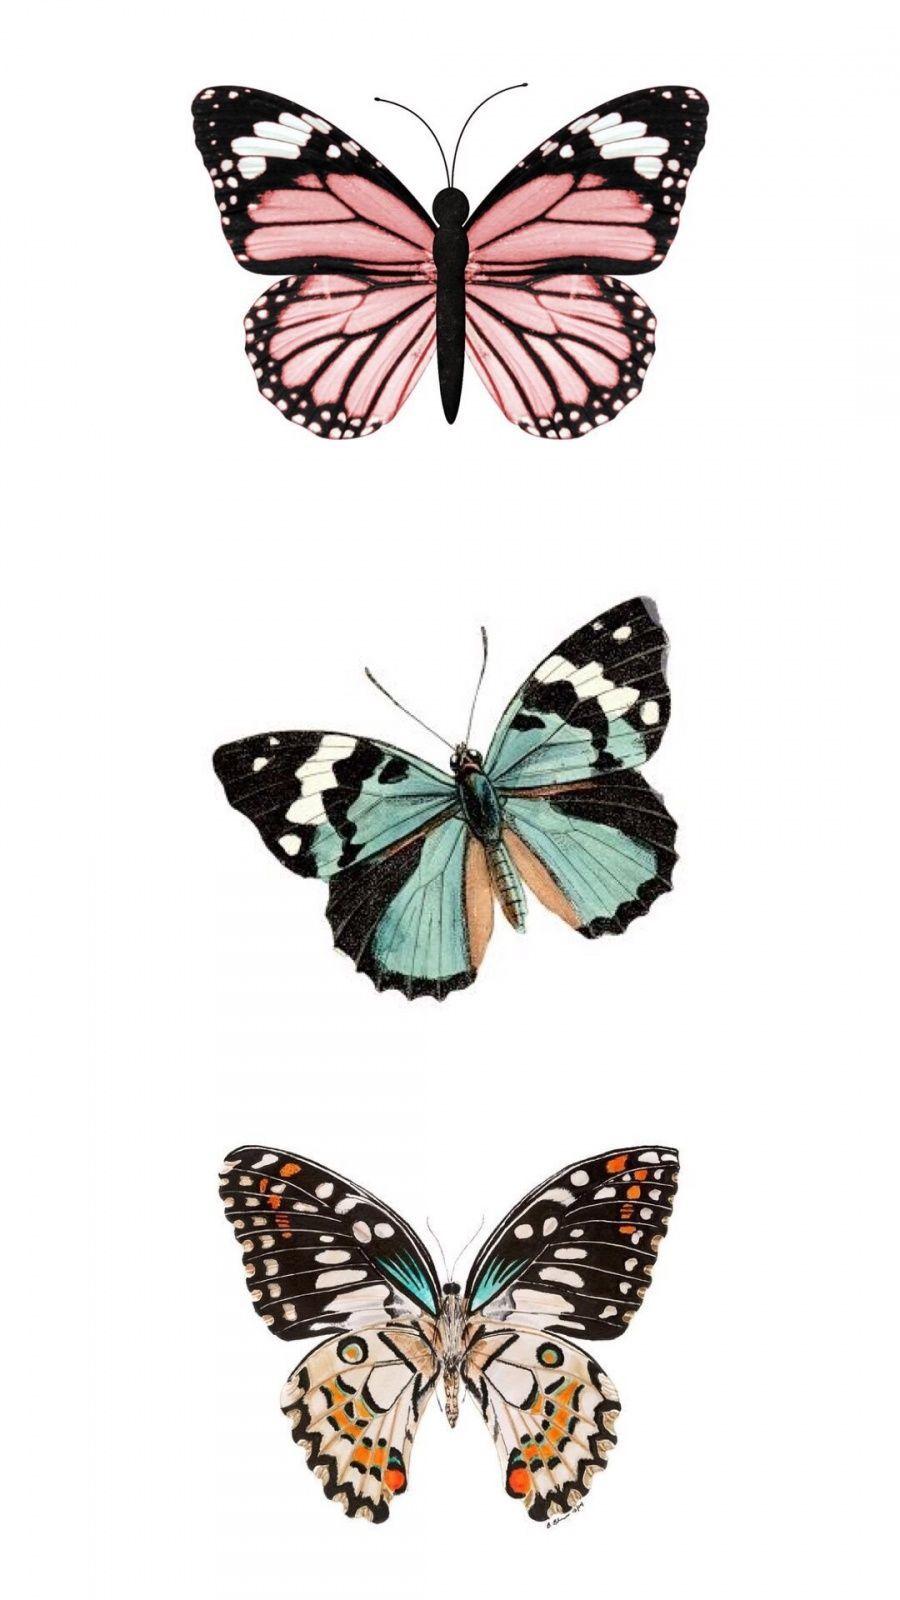 Aesthetic Butterfly Macbook Wallpaper Aesthetic Collage